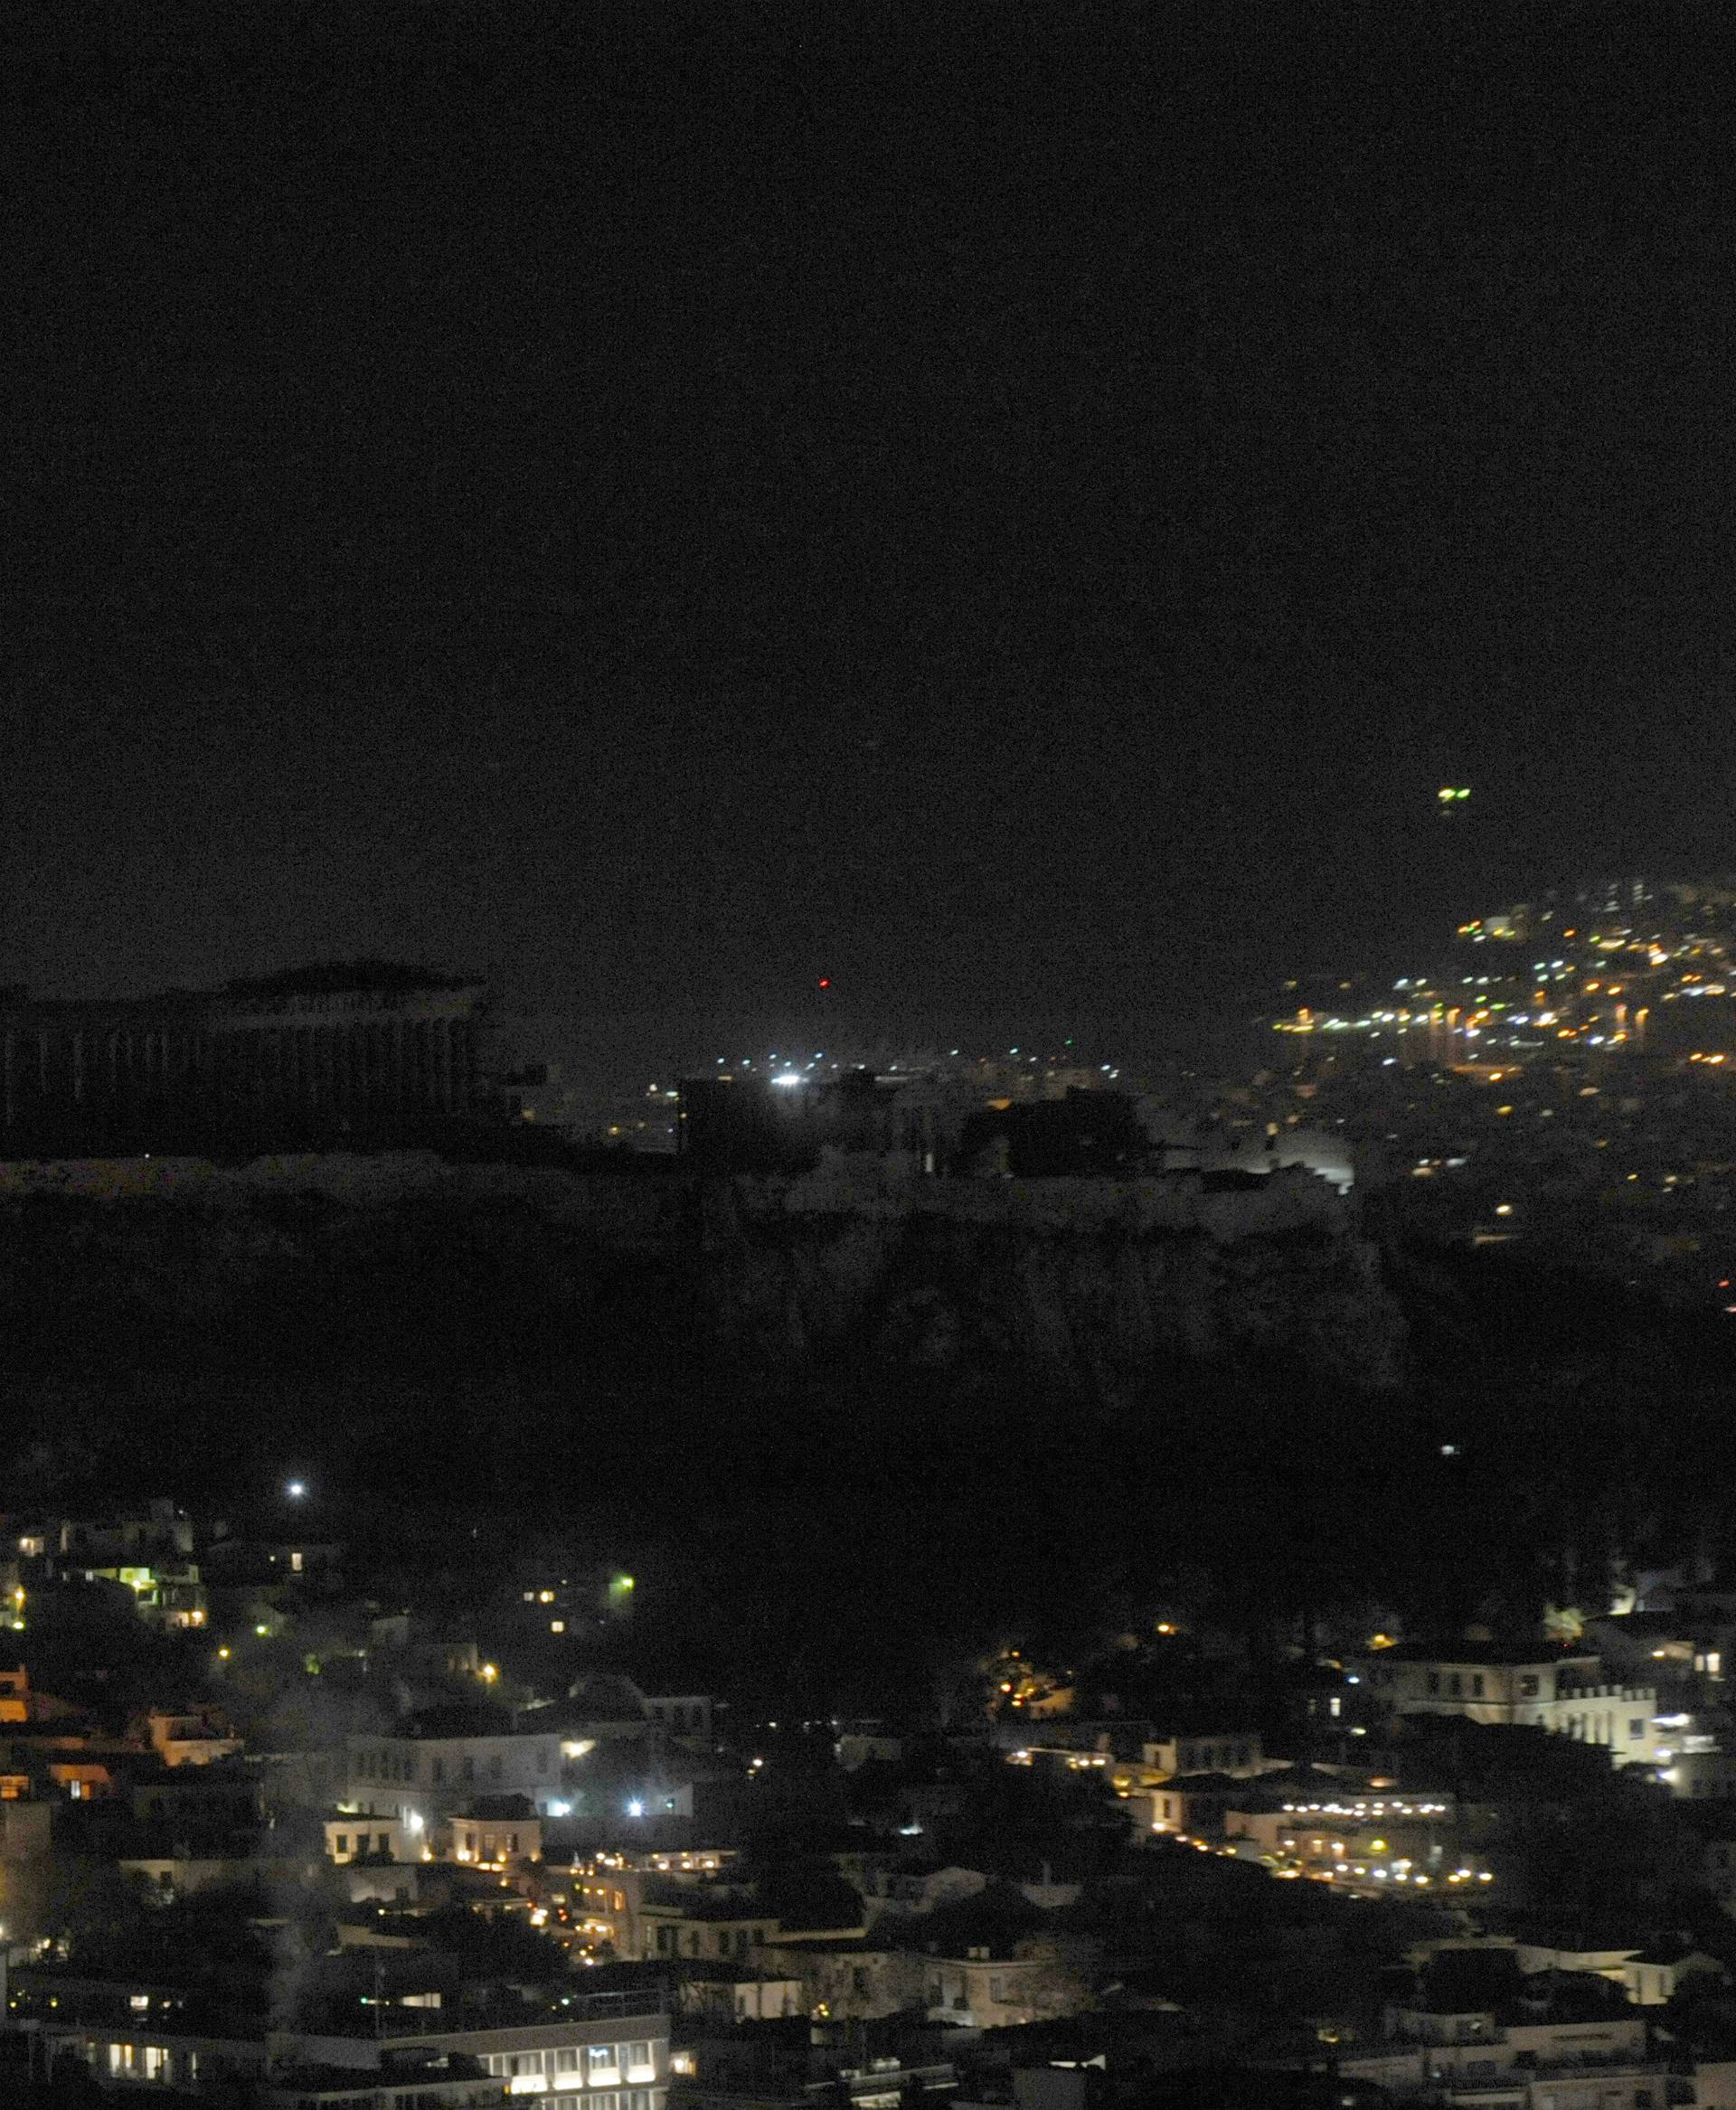 The hill of the Acropolis is pictured during Earth Hour in Athens, Greece